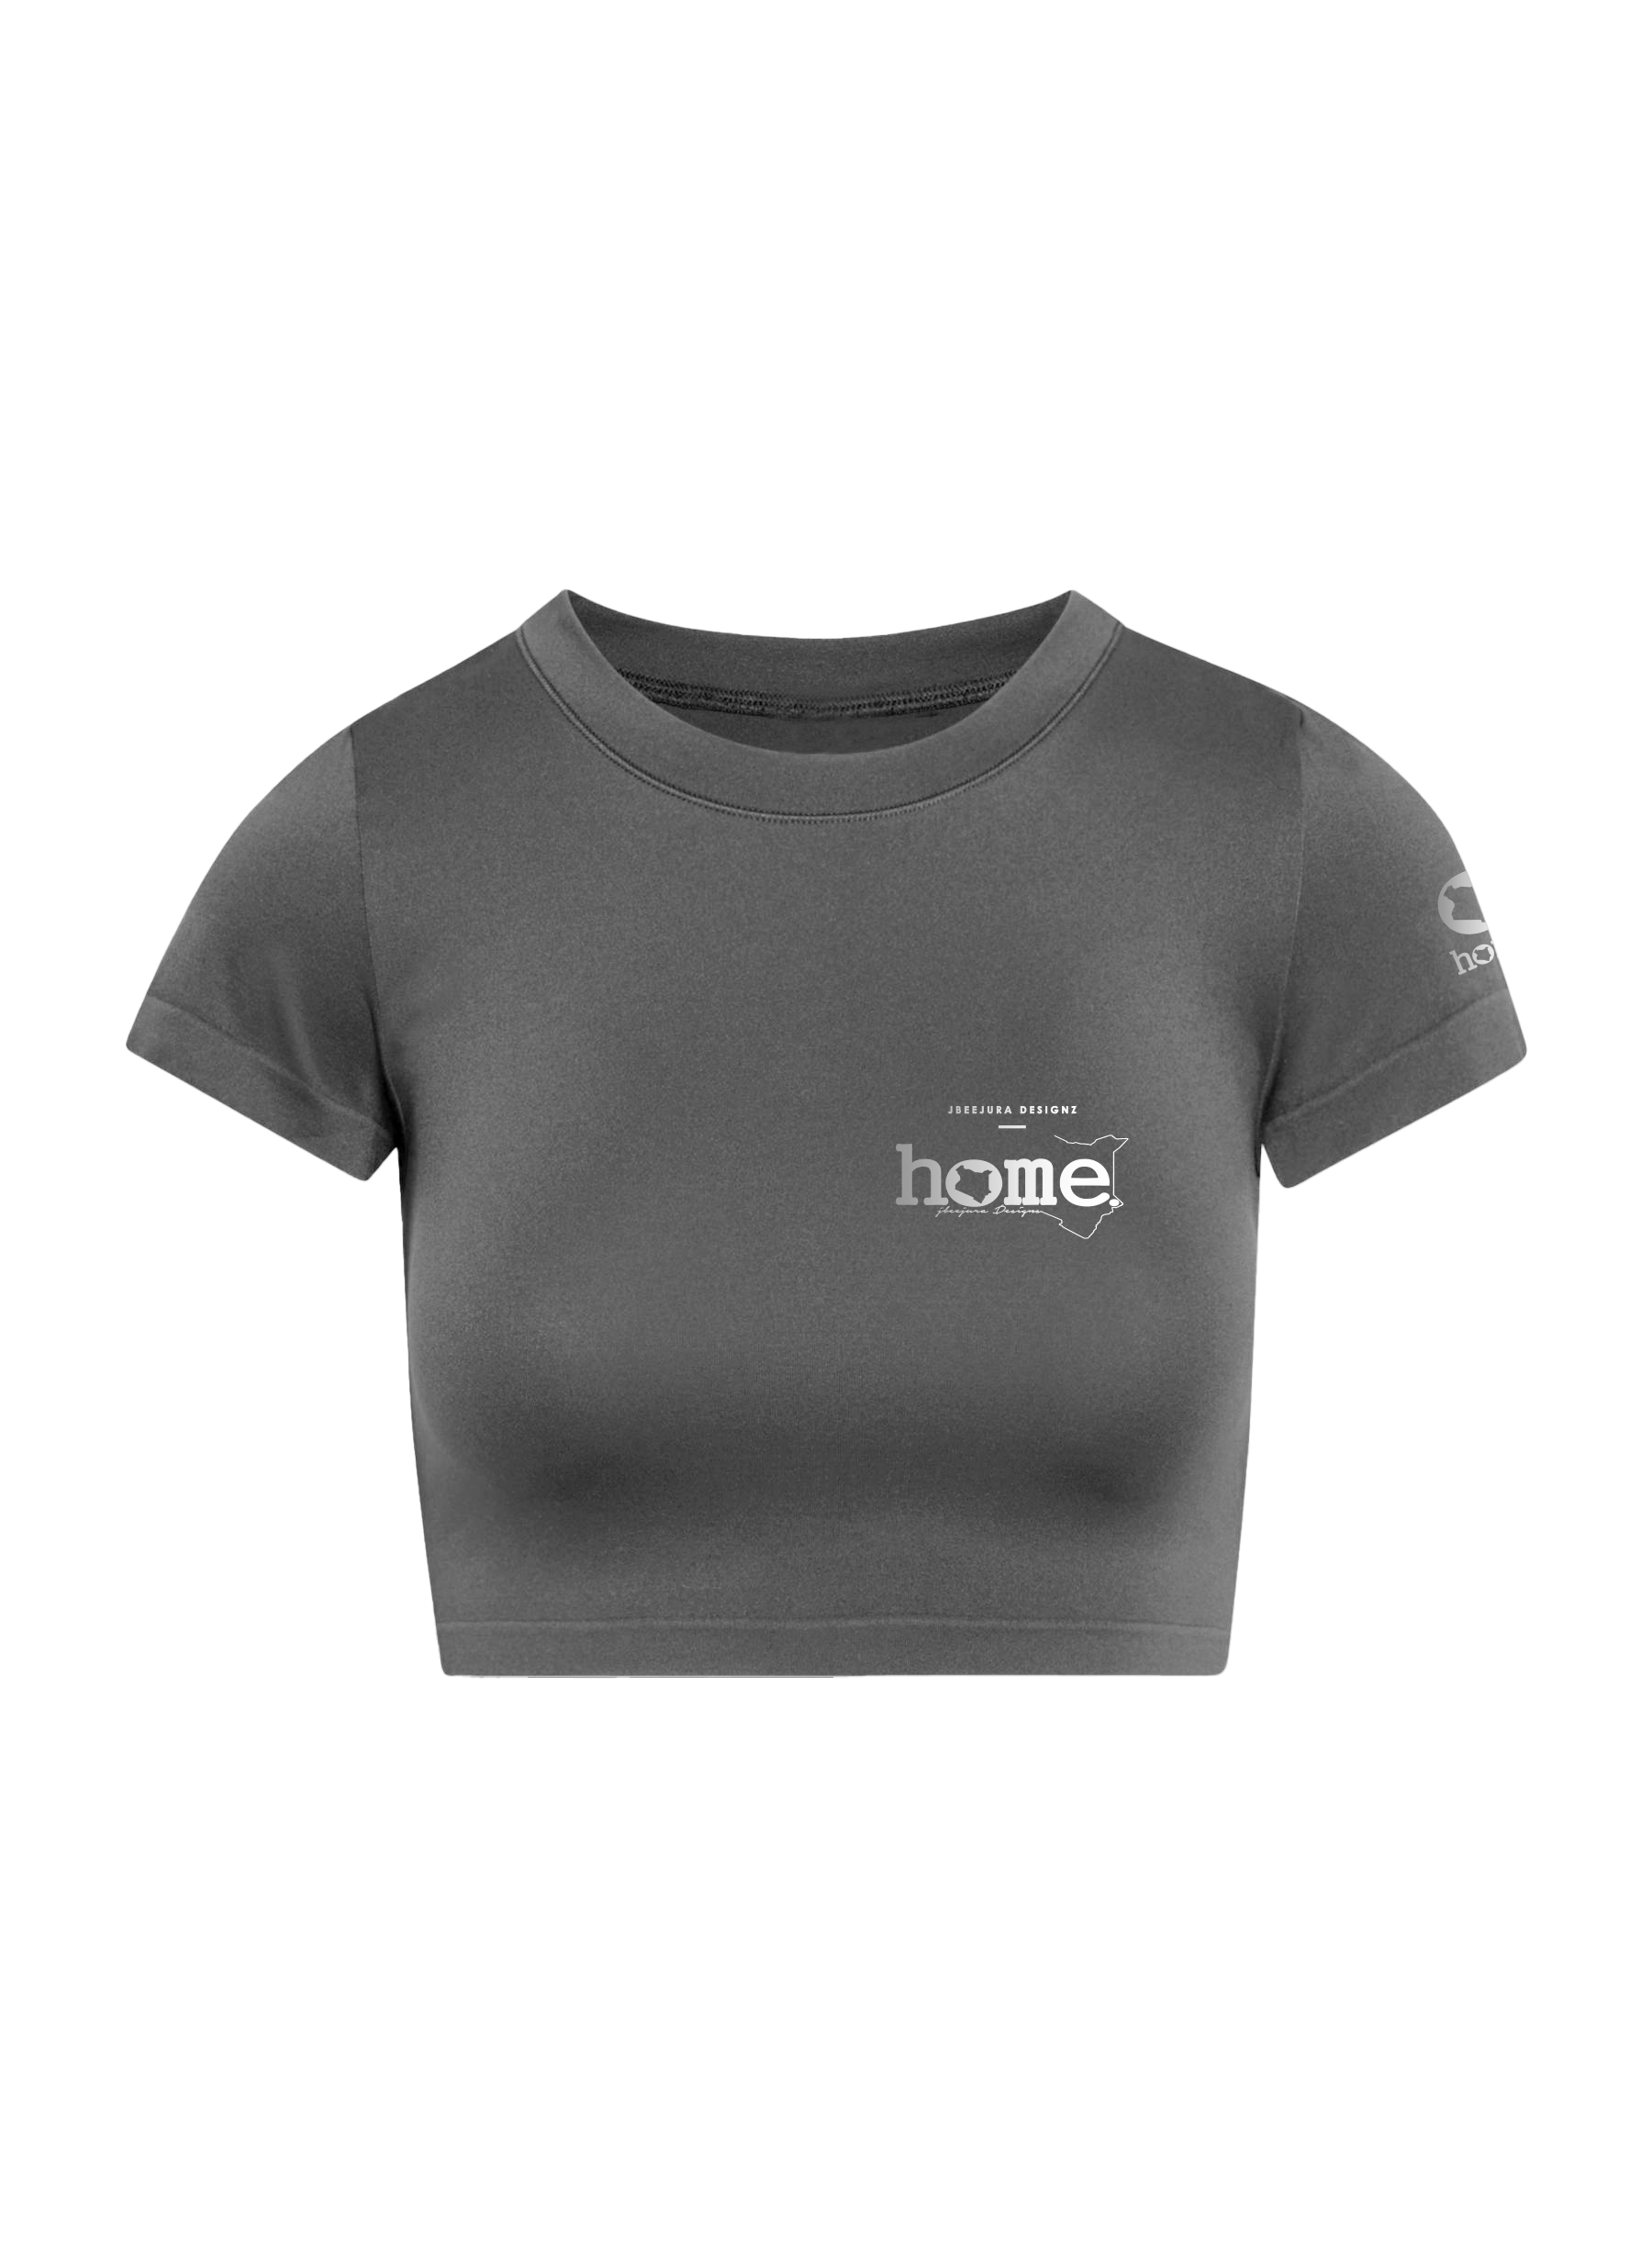 home_254 SHORT SLEEVED SAGE CROPPED ARIA TEE WITH A SILVER 3D WORDS PRINT 